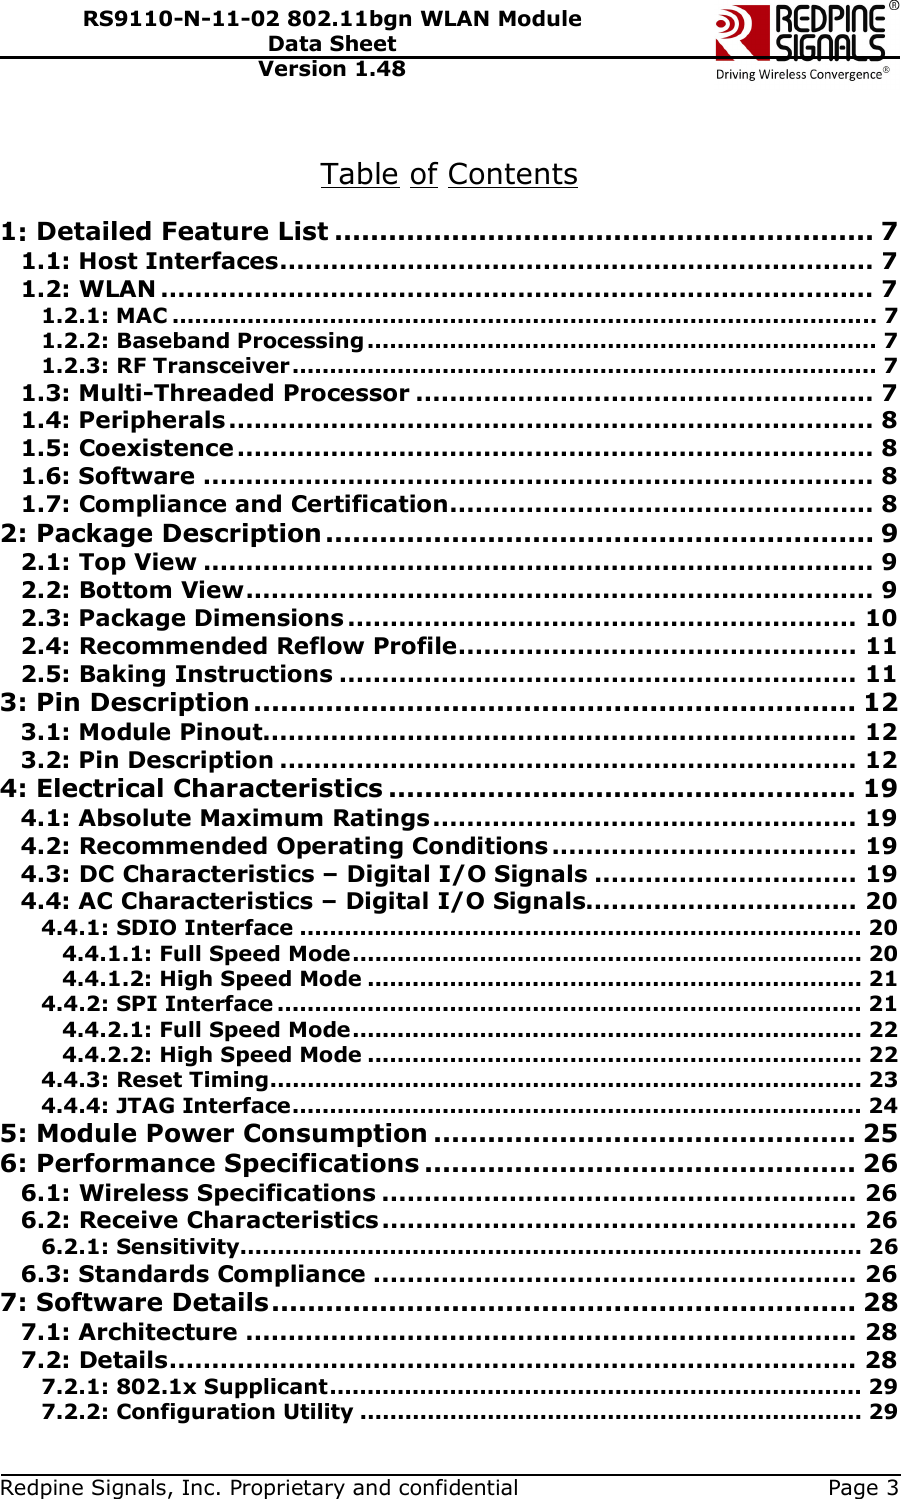   Redpine Signals, Inc. Proprietary and confidential  Page 3 RS9110-N-11-02 802.11bgn WLAN Module Data Sheet Version 1.48  Table of Contents  1: Detailed Feature List ............................................................ 7 1.1: Host Interfaces...................................................................... 7 1.2: WLAN .................................................................................... 7 1.2.1: MAC .............................................................................................. 7 1.2.2: Baseband Processing.................................................................... 7 1.2.3: RF Transceiver.............................................................................. 7 1.3: Multi-Threaded Processor ...................................................... 7 1.4: Peripherals............................................................................ 8 1.5: Coexistence........................................................................... 8 1.6: Software ............................................................................... 8 1.7: Compliance and Certification.................................................. 8 2: Package Description ............................................................. 9 2.1: Top View ............................................................................... 9 2.2: Bottom View.......................................................................... 9 2.3: Package Dimensions ............................................................ 10 2.4: Recommended Reflow Profile............................................... 11 2.5: Baking Instructions ............................................................. 11 3: Pin Description ................................................................... 12 3.1: Module Pinout...................................................................... 12 3.2: Pin Description .................................................................... 12 4: Electrical Characteristics .................................................... 19 4.1: Absolute Maximum Ratings.................................................. 19 4.2: Recommended Operating Conditions .................................... 19 4.3: DC Characteristics – Digital I/O Signals ............................... 19 4.4: AC Characteristics – Digital I/O Signals................................ 20 4.4.1: SDIO Interface ........................................................................... 20 4.4.1.1: Full Speed Mode.................................................................... 20 4.4.1.2: High Speed Mode .................................................................. 21 4.4.2: SPI Interface .............................................................................. 21 4.4.2.1: Full Speed Mode.................................................................... 22 4.4.2.2: High Speed Mode .................................................................. 22 4.4.3: Reset Timing............................................................................... 23 4.4.4: JTAG Interface............................................................................ 24 5: Module Power Consumption ............................................... 25 6: Performance Specifications ................................................ 26 6.1: Wireless Specifications ........................................................ 26 6.2: Receive Characteristics........................................................ 26 6.2.1: Sensitivity................................................................................... 26 6.3: Standards Compliance ......................................................... 26 7: Software Details................................................................. 28 7.1: Architecture ........................................................................ 28 7.2: Details................................................................................. 28 7.2.1: 802.1x Supplicant....................................................................... 29 7.2.2: Configuration Utility ................................................................... 29 